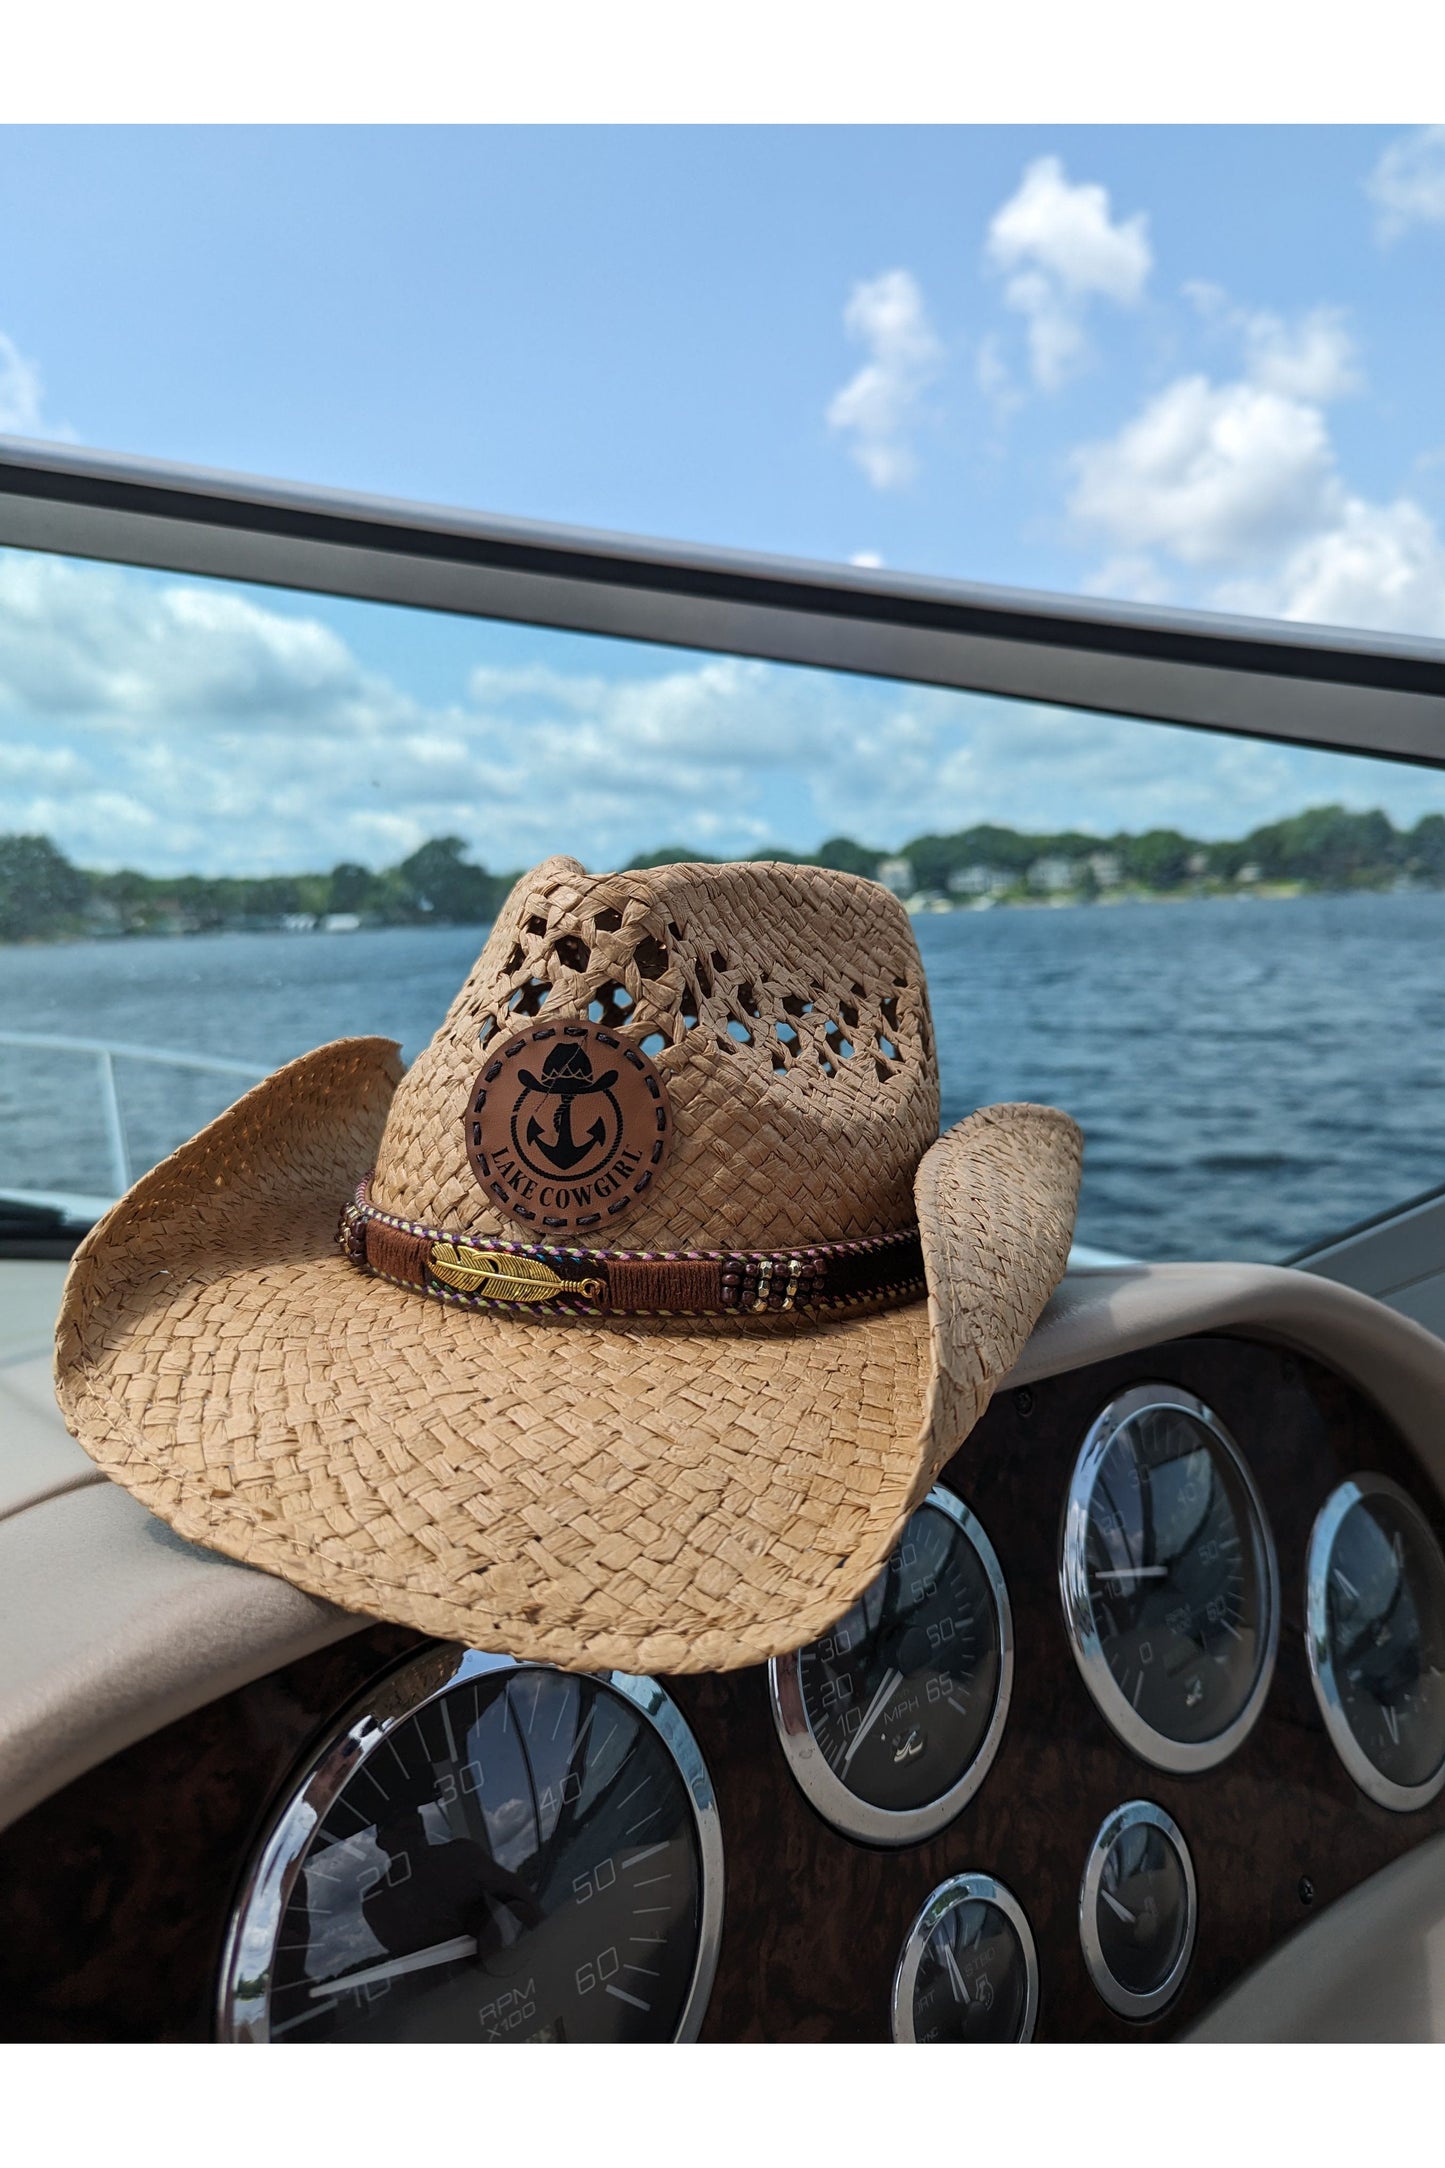 Photo of a Lake Cowgirl Signature Cowboy Hat with Feather Band (Tea Colored) – Shown on a boat console on Lake Minnetonka.